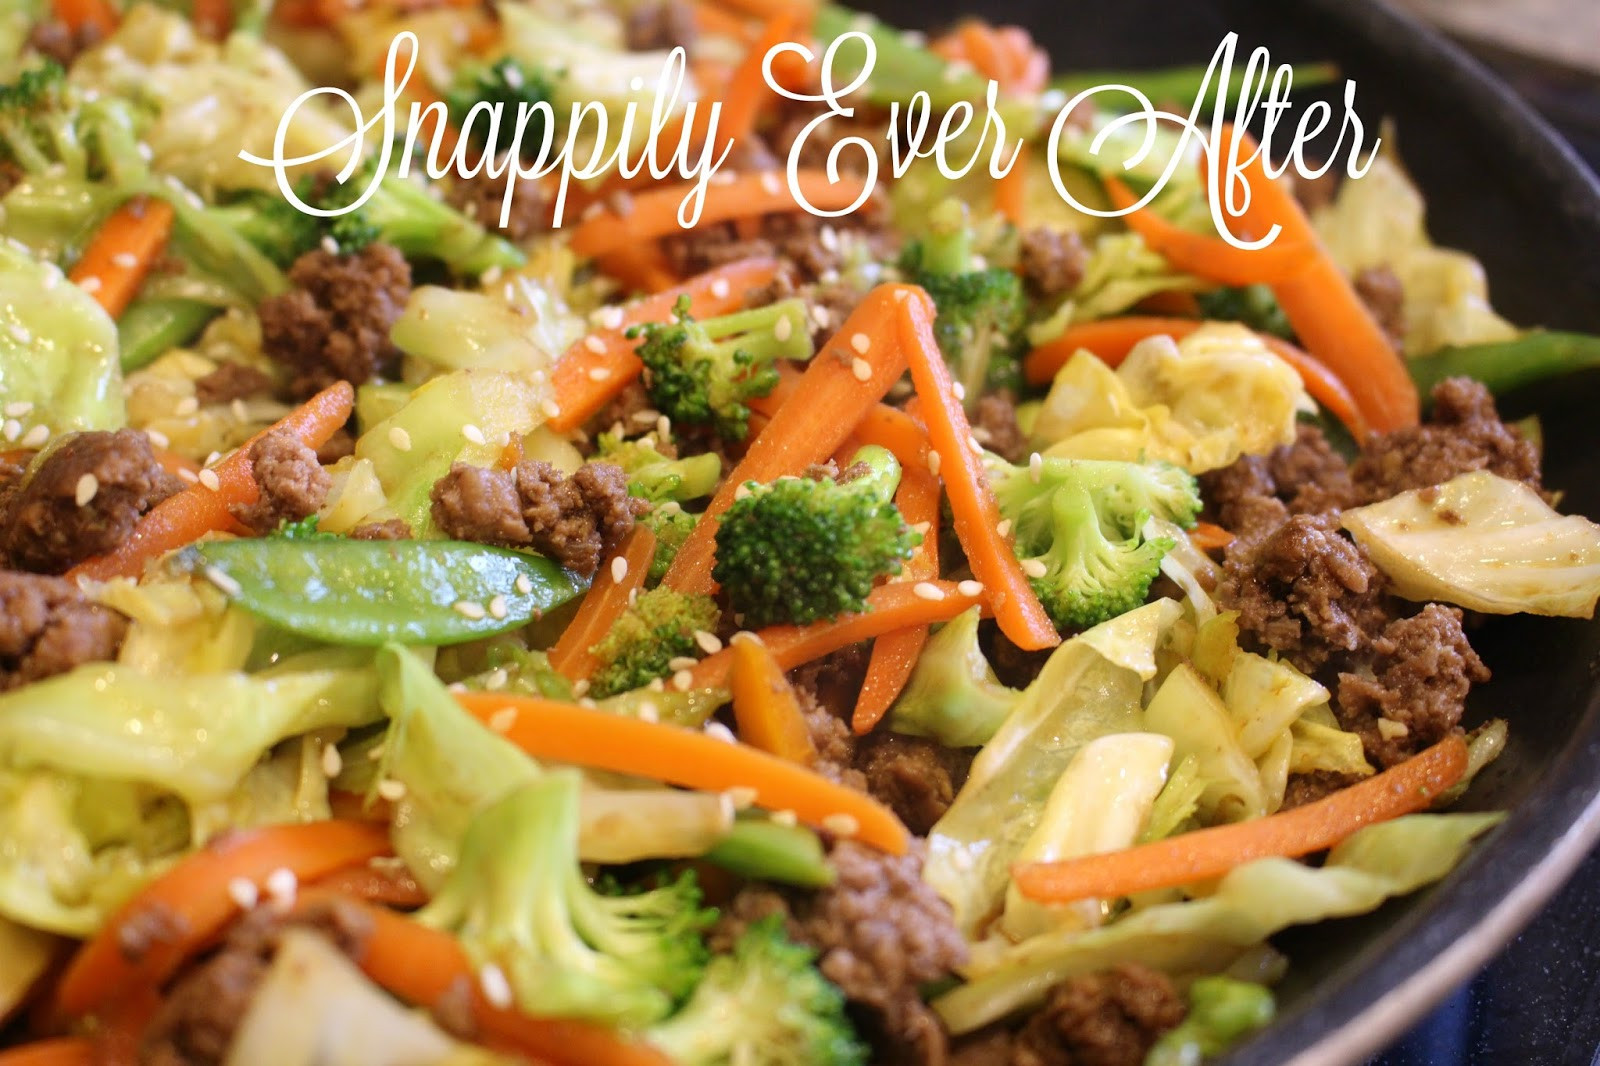 Cabbage Stir Fry
 Snappily Ever After Beef and Cabbage Stir Fry